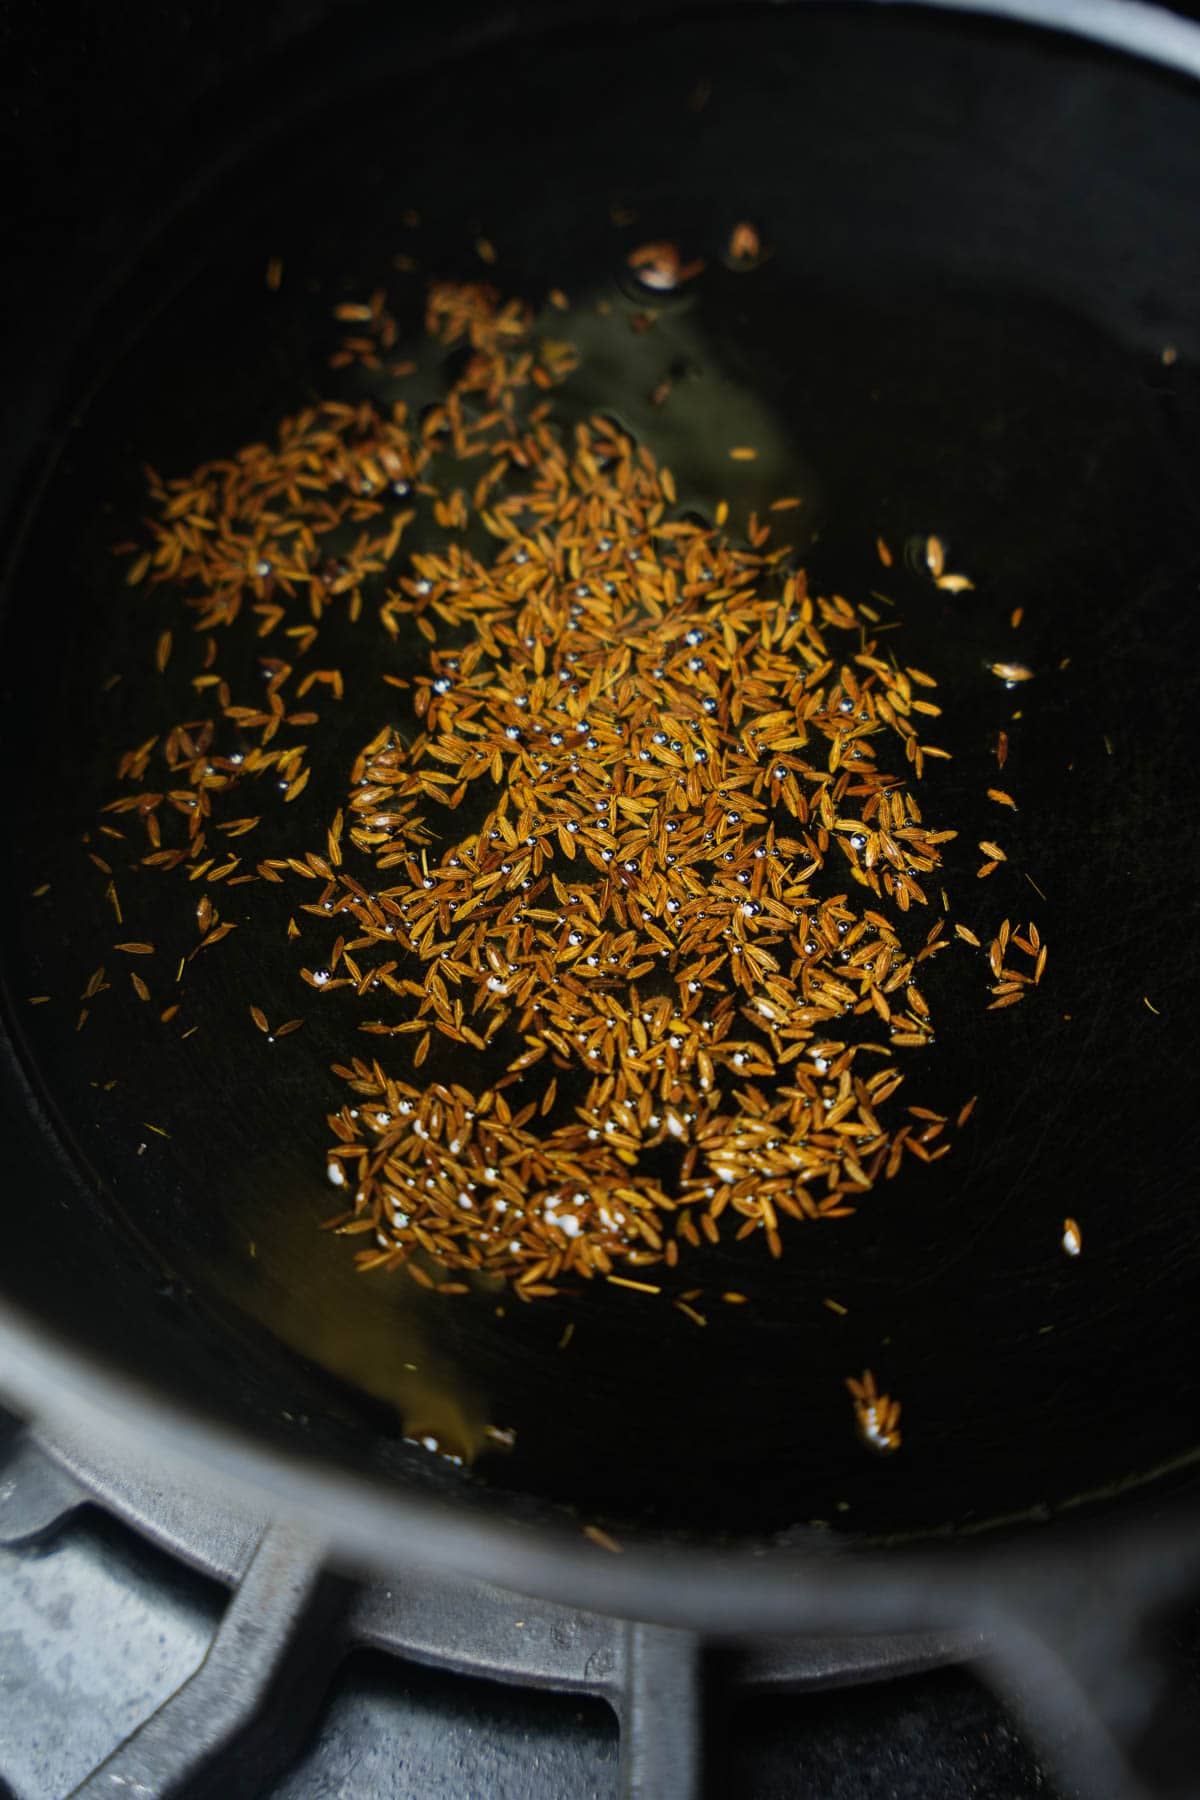 Cumin seeds being fried in hot oil in a black pan.